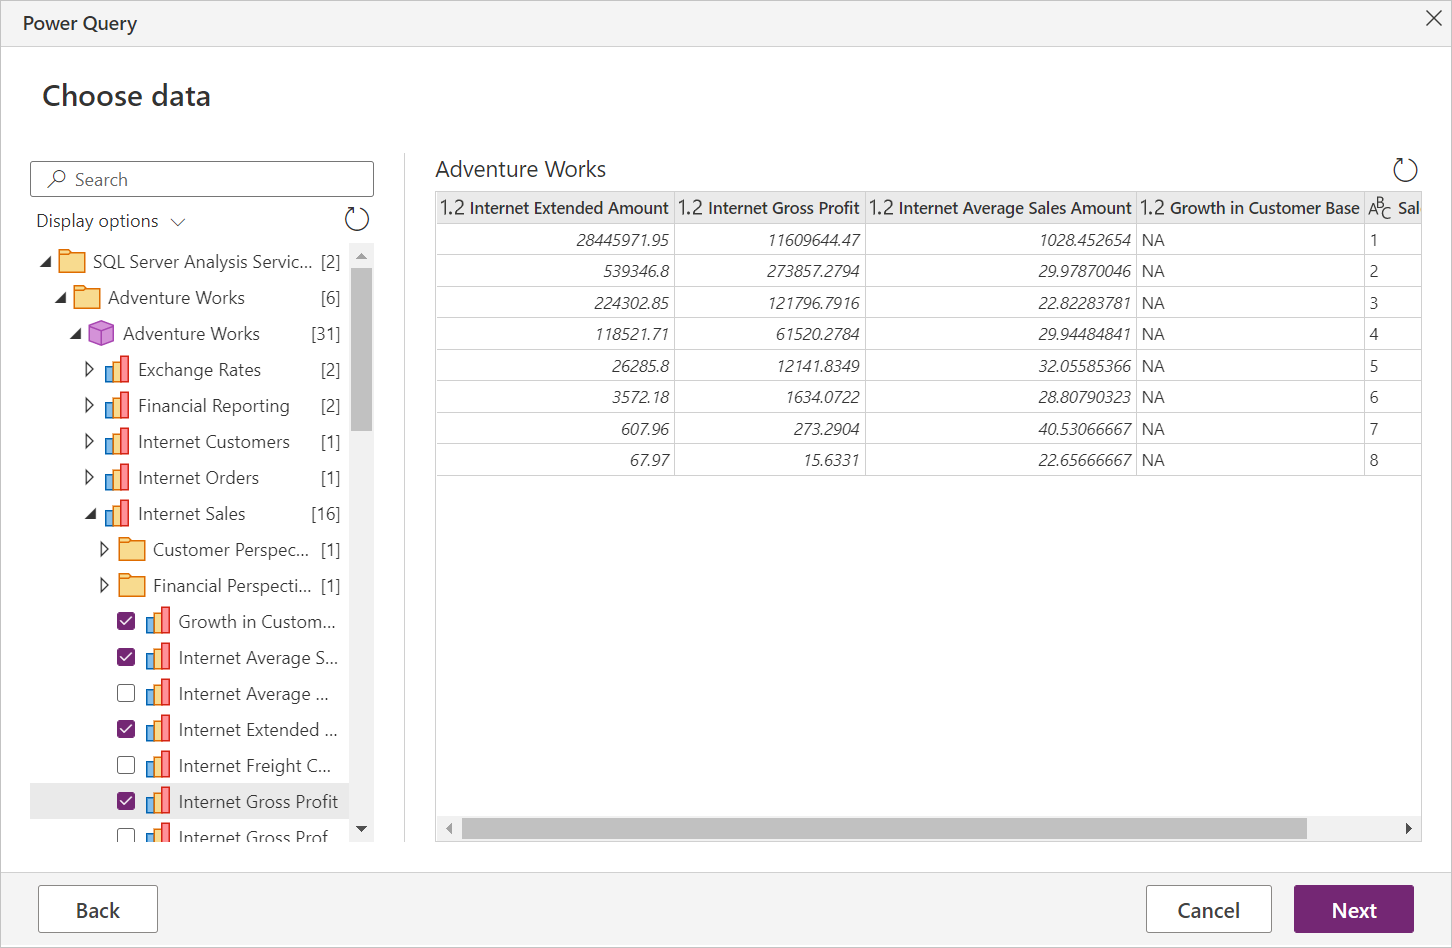 Power Query Online Navigator showing some Financial Perspective data.